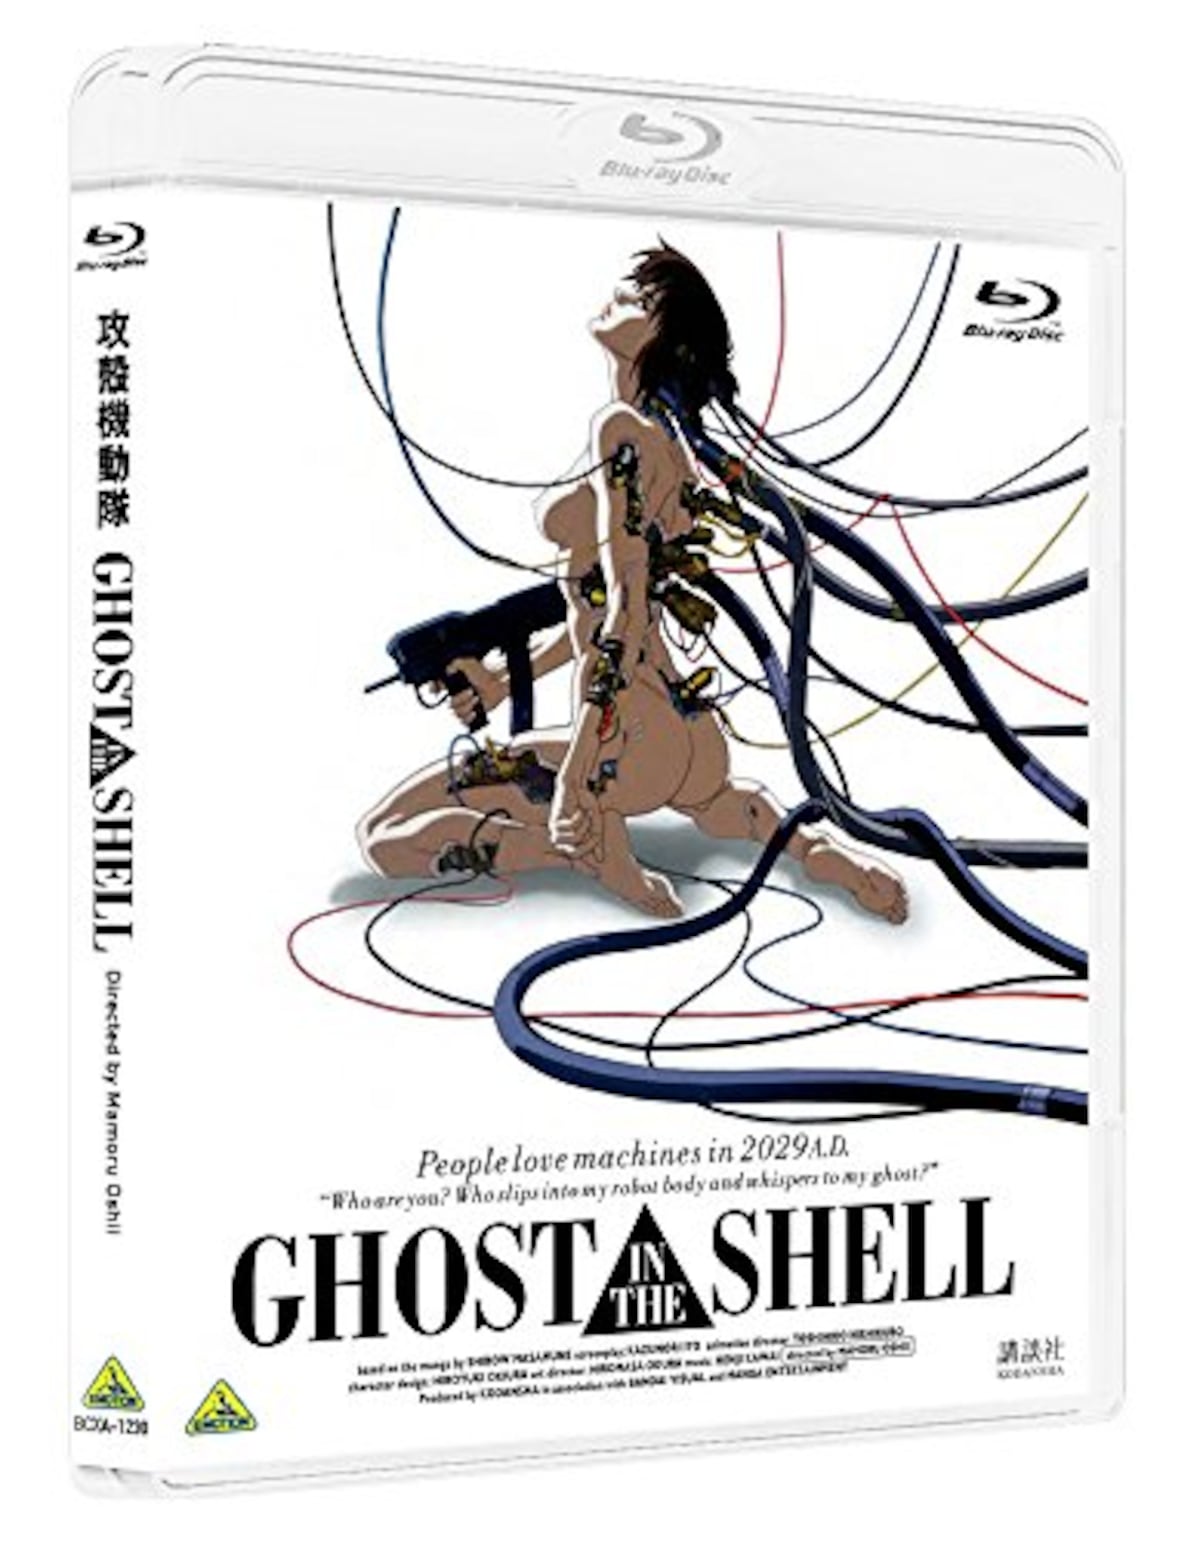 GHOST IN THE SHELL/攻殻機動隊（Blu-ray）